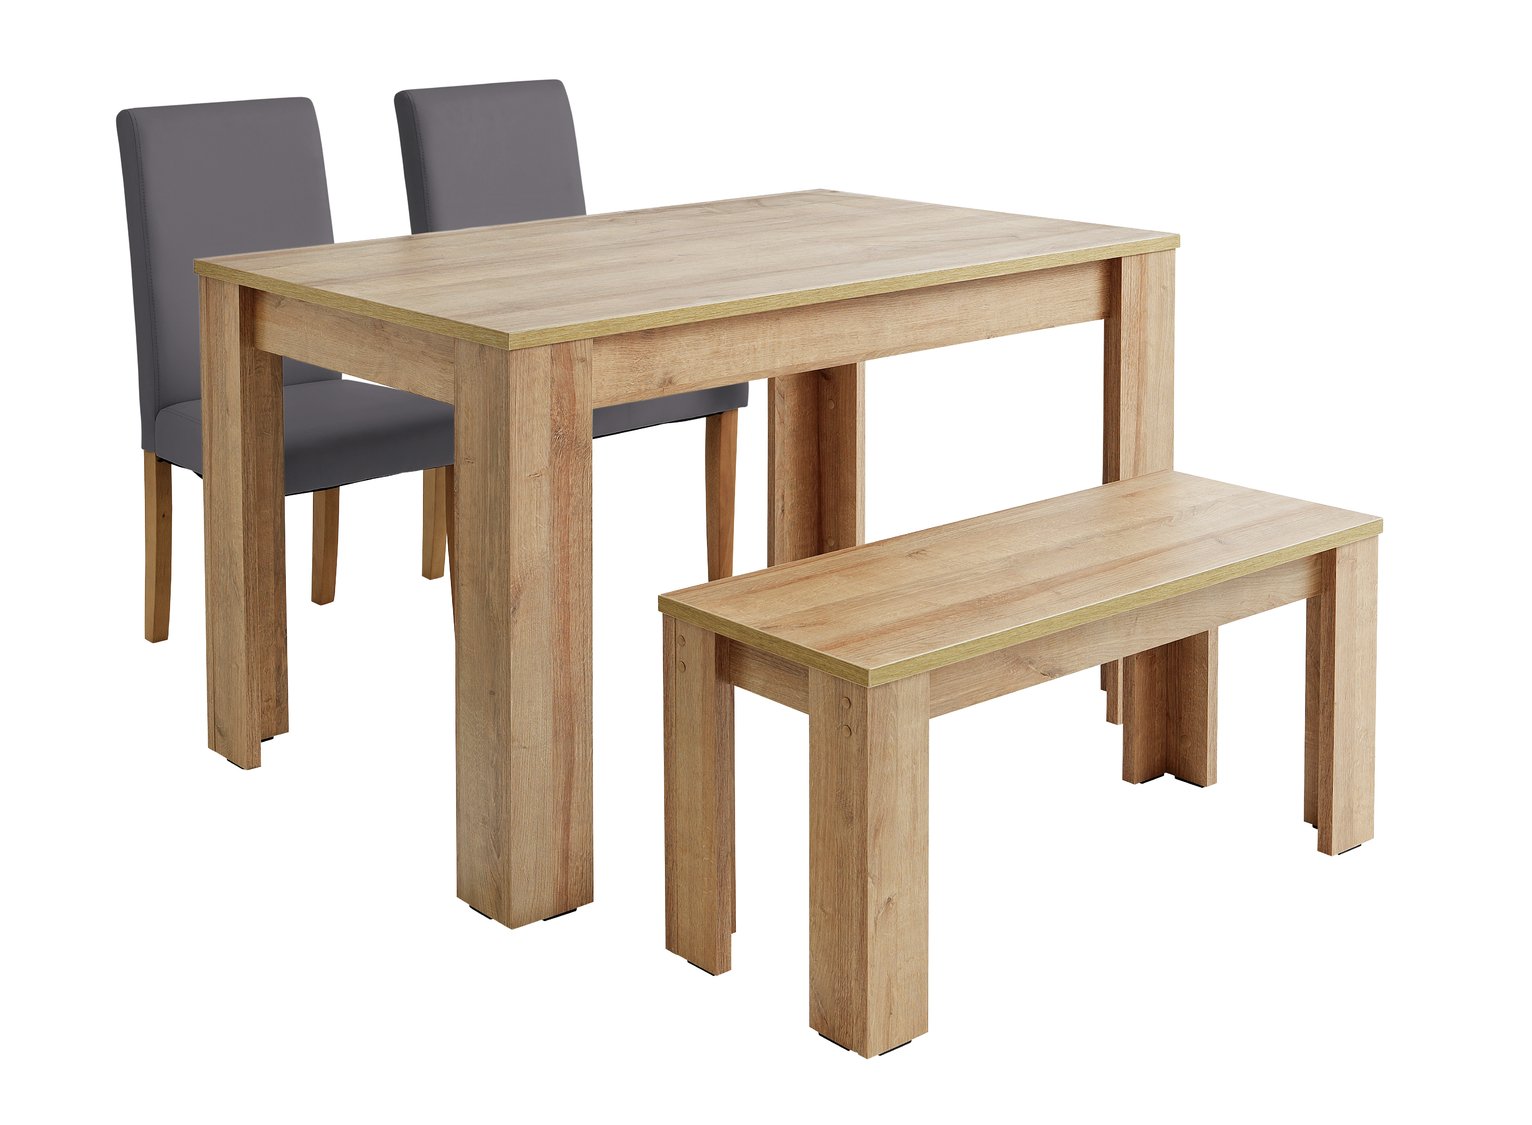 Argos Home Miami Oak Effect Table, Bench & 2 Charcoal Chairs